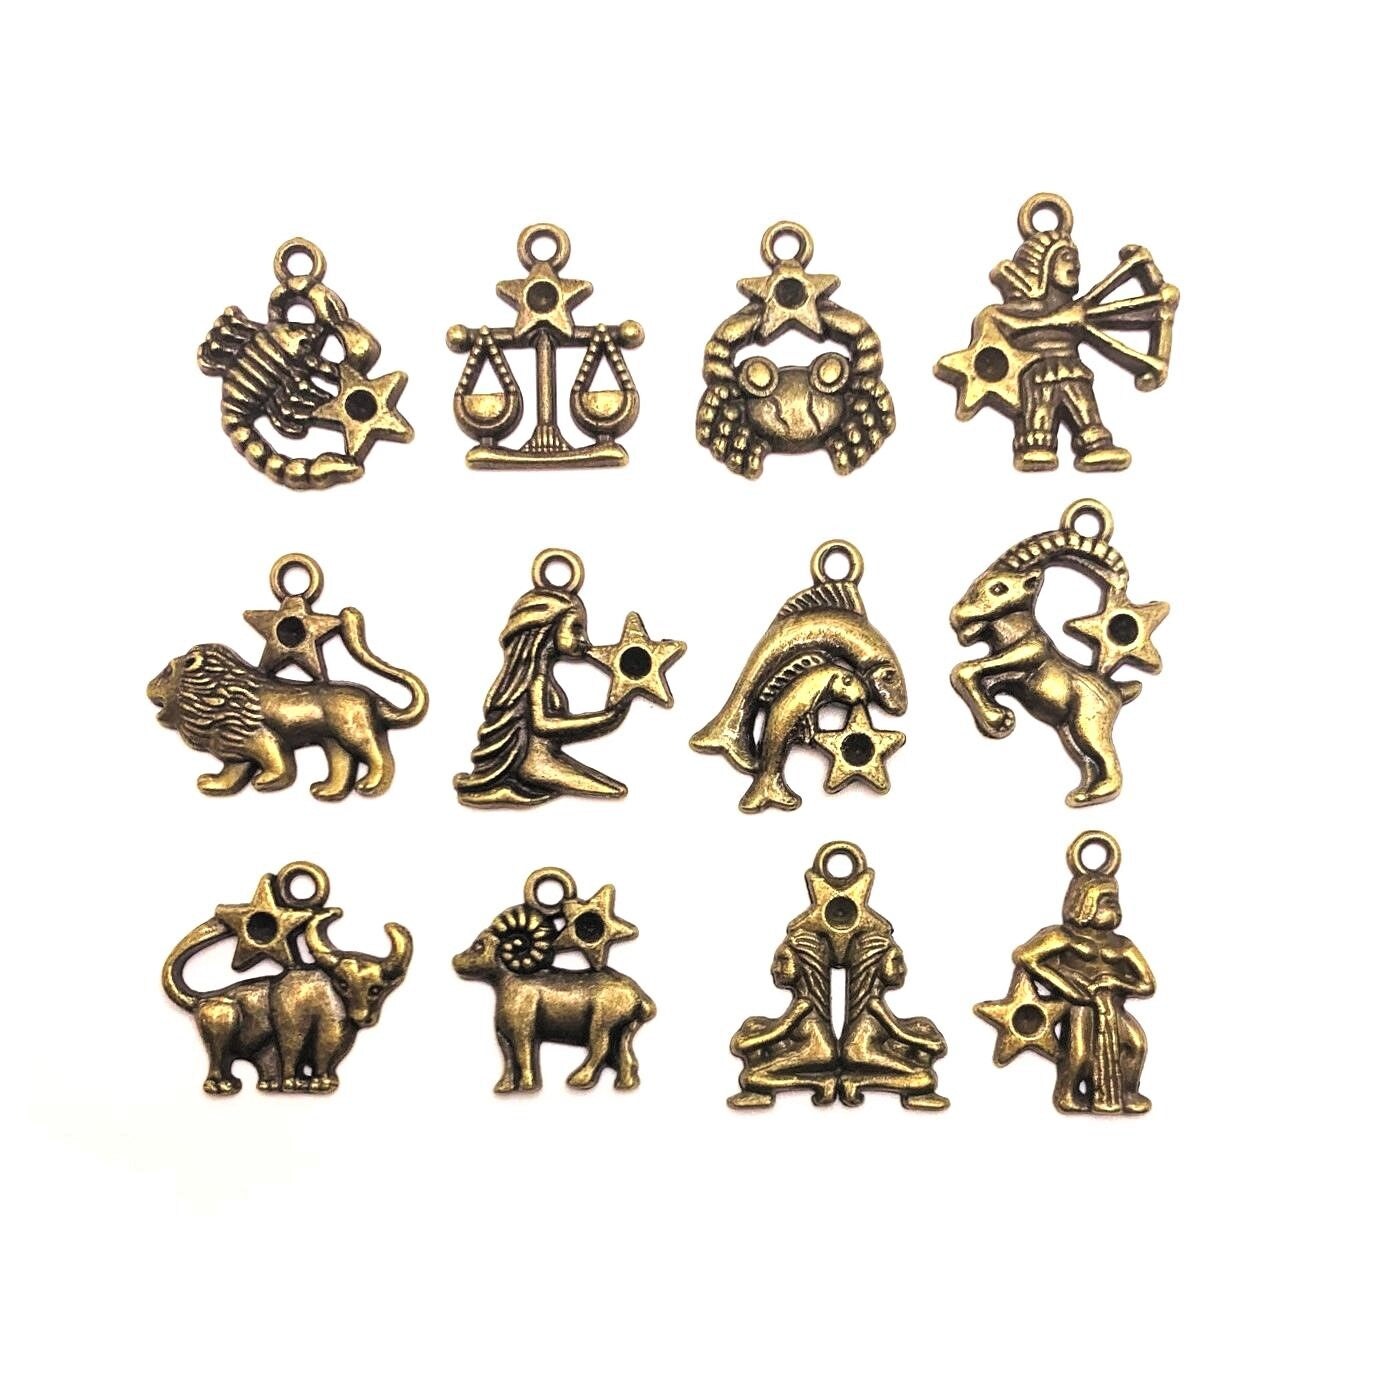 12 or 60 Pieces: Bronze Zodiac/Astrology Character Astrology Sign Charms